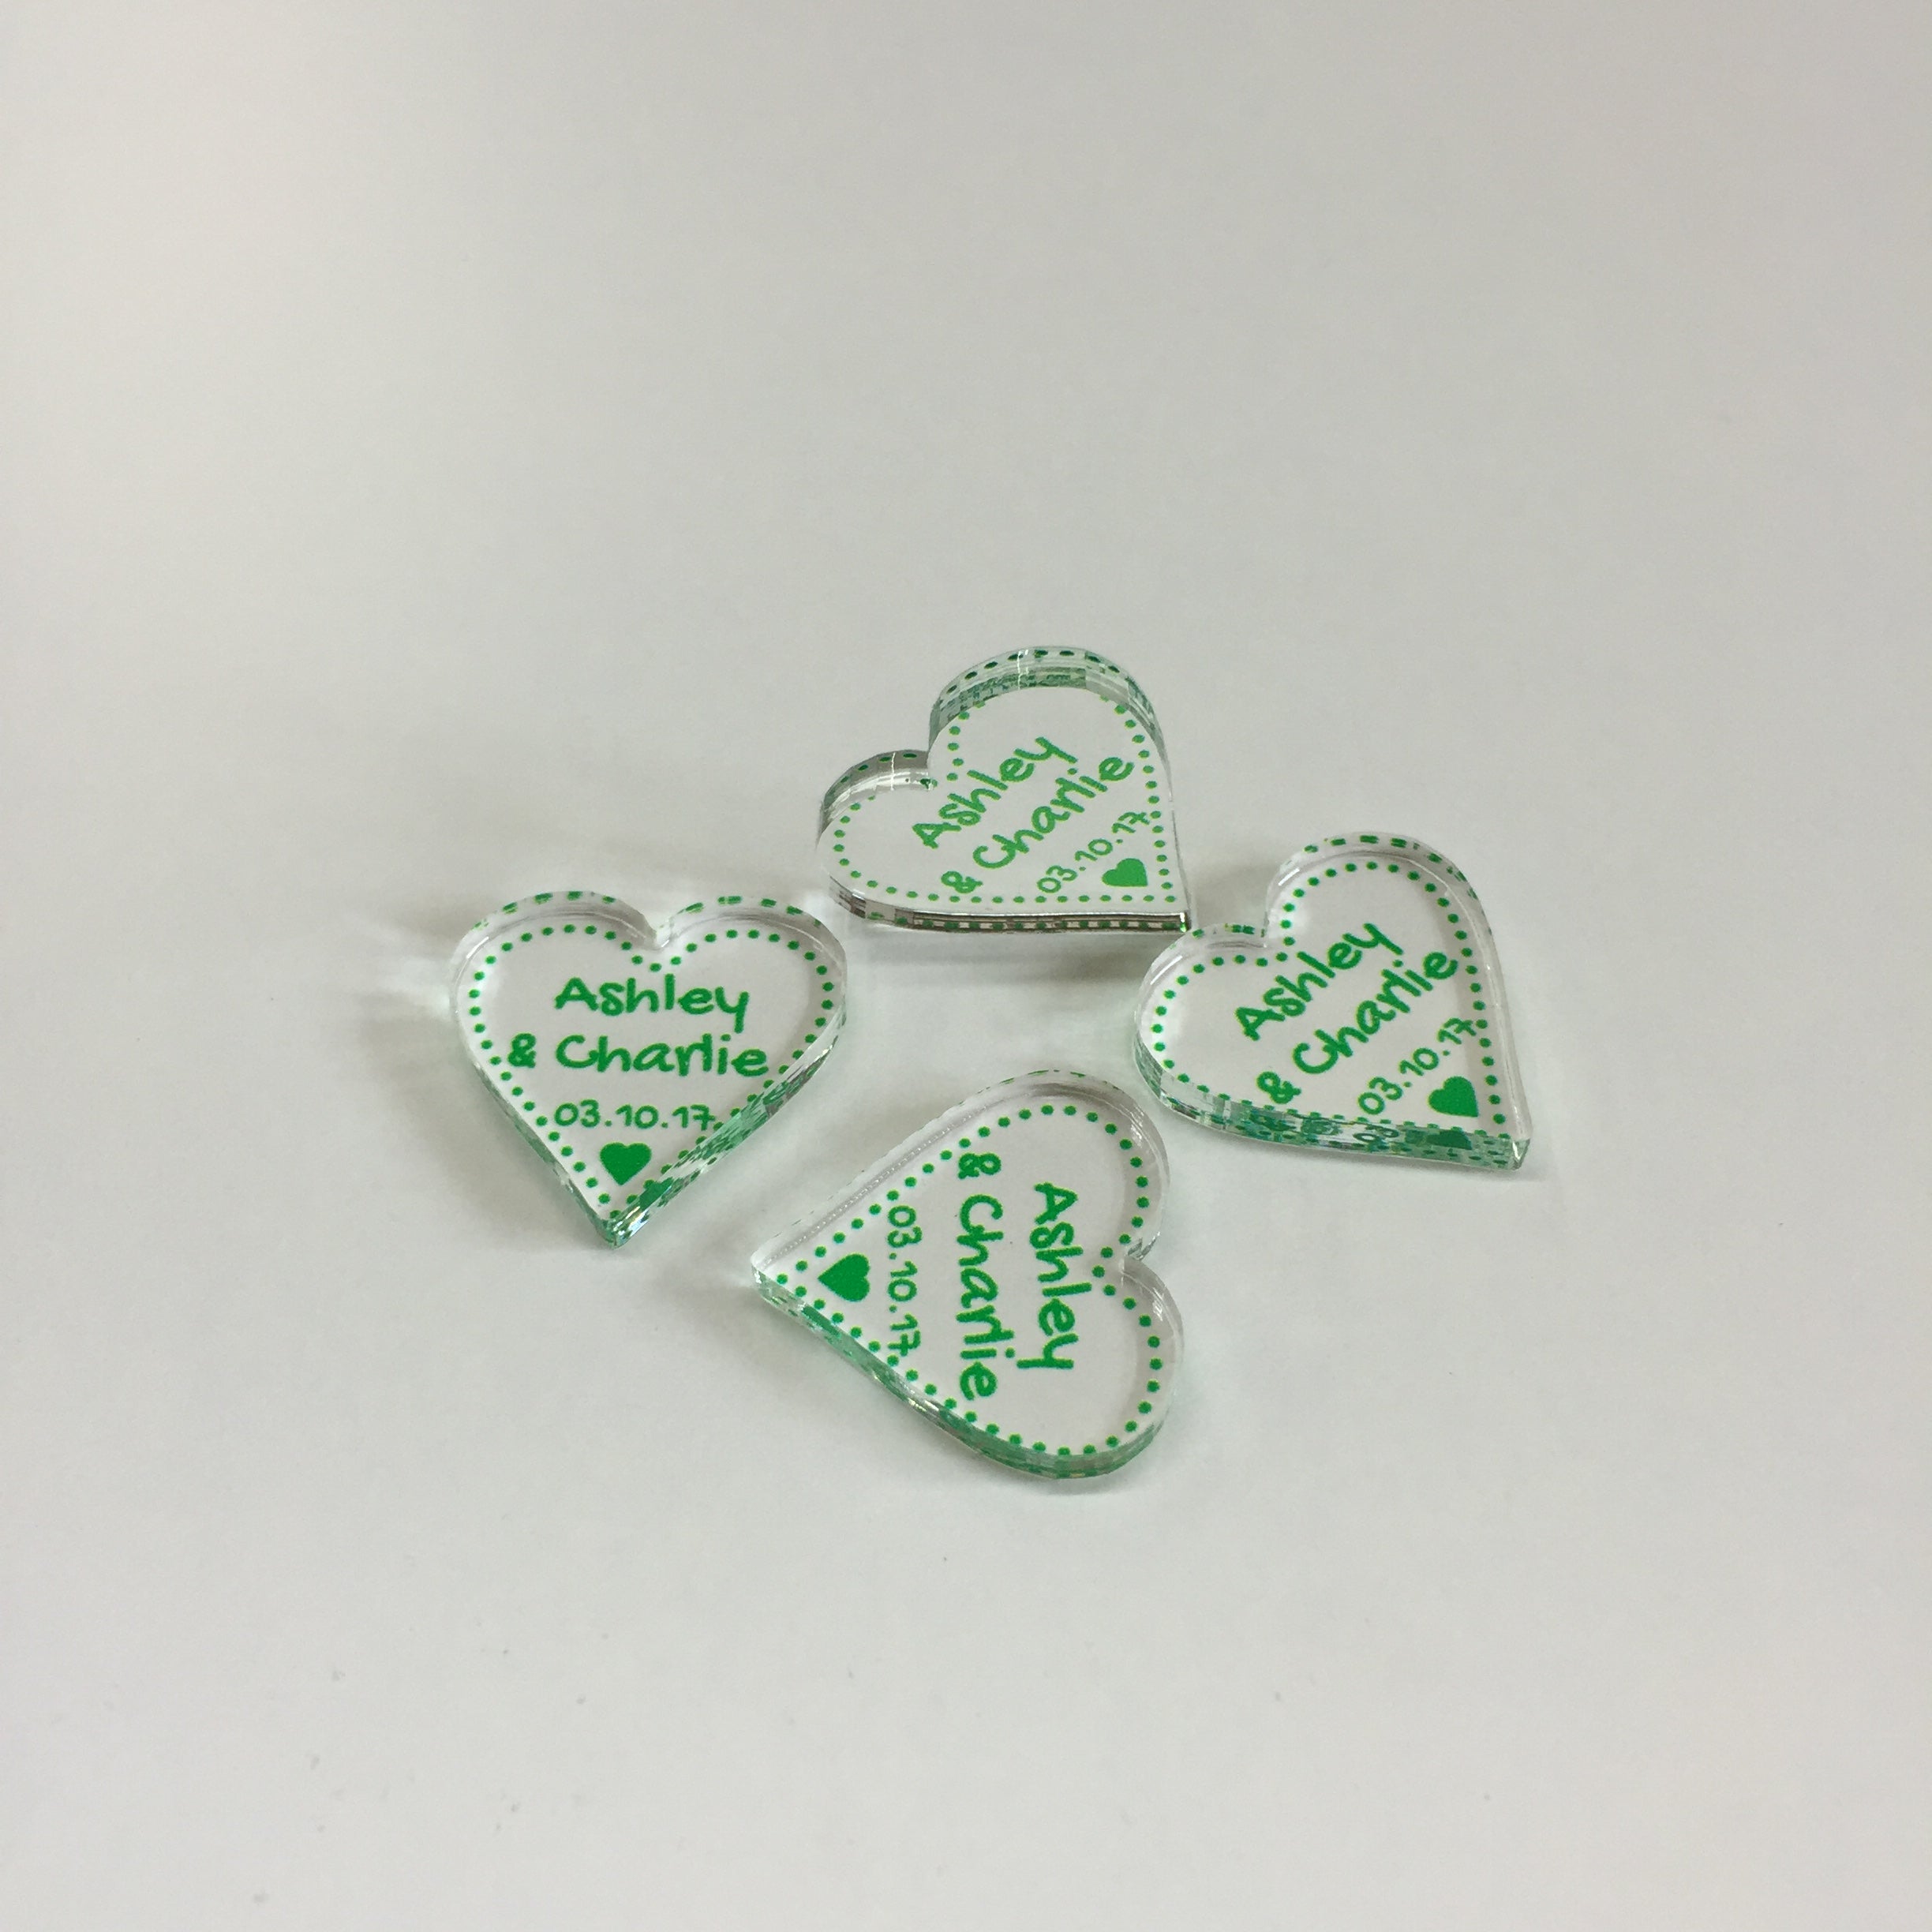 Personalised Wedding Favours - Clear Acrylic + Green Acrylic Love Hearts